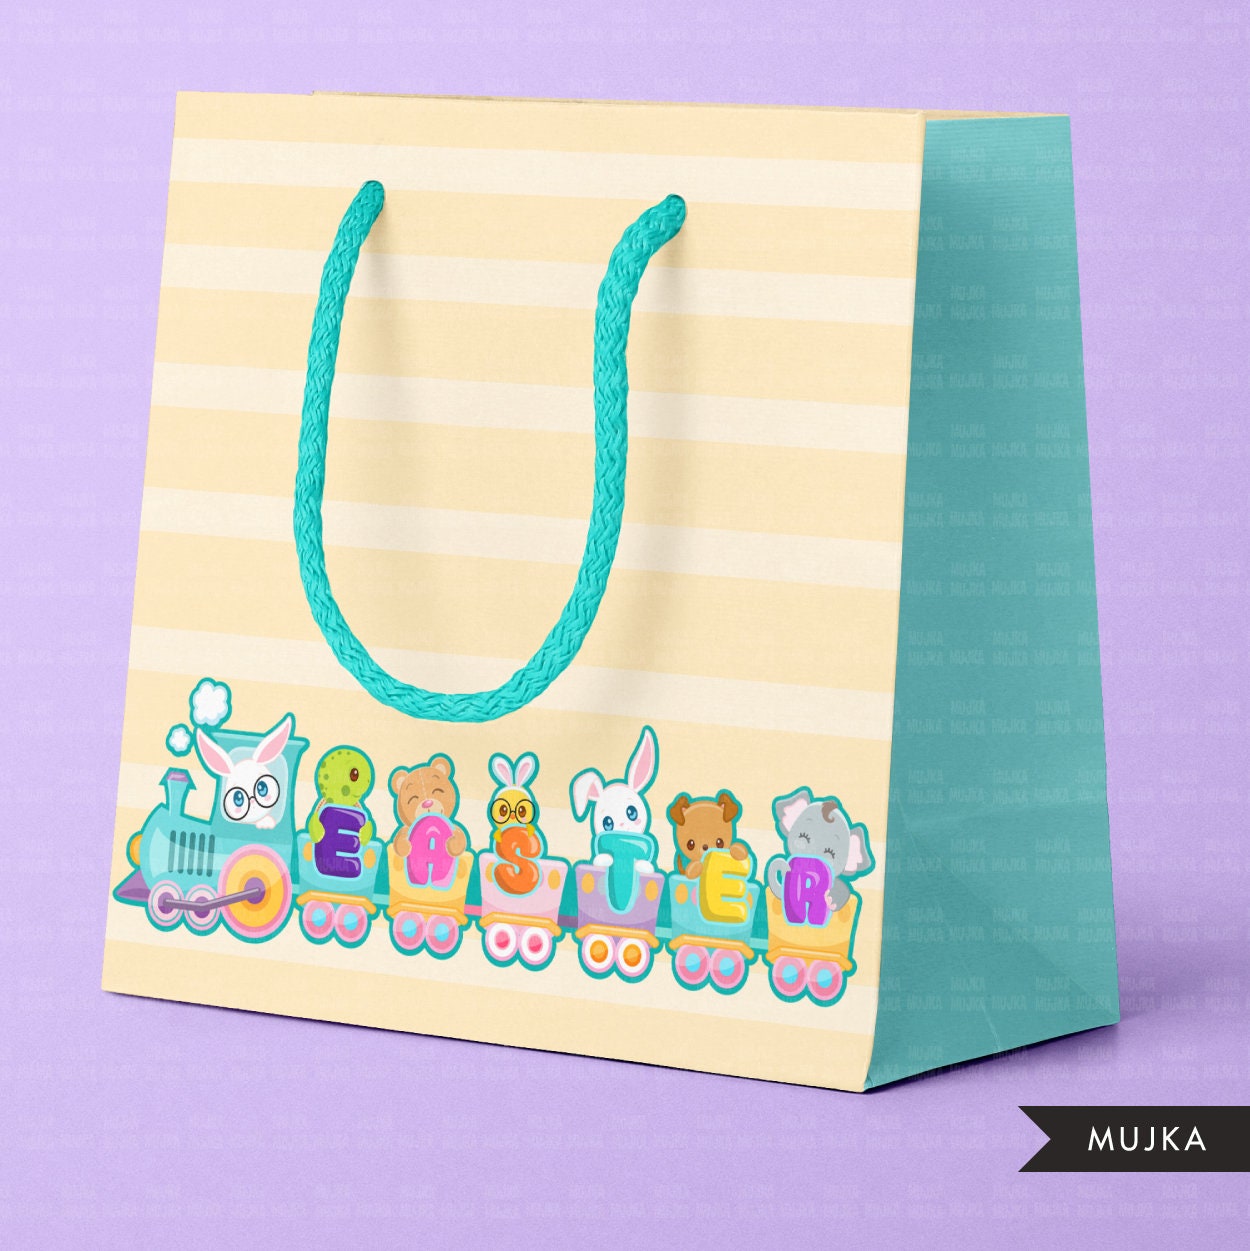 Easter train png, Easter train clipart, Easter animals png, Easter sublimation designs, spring png, bunny train, Easter shirt png, chick png